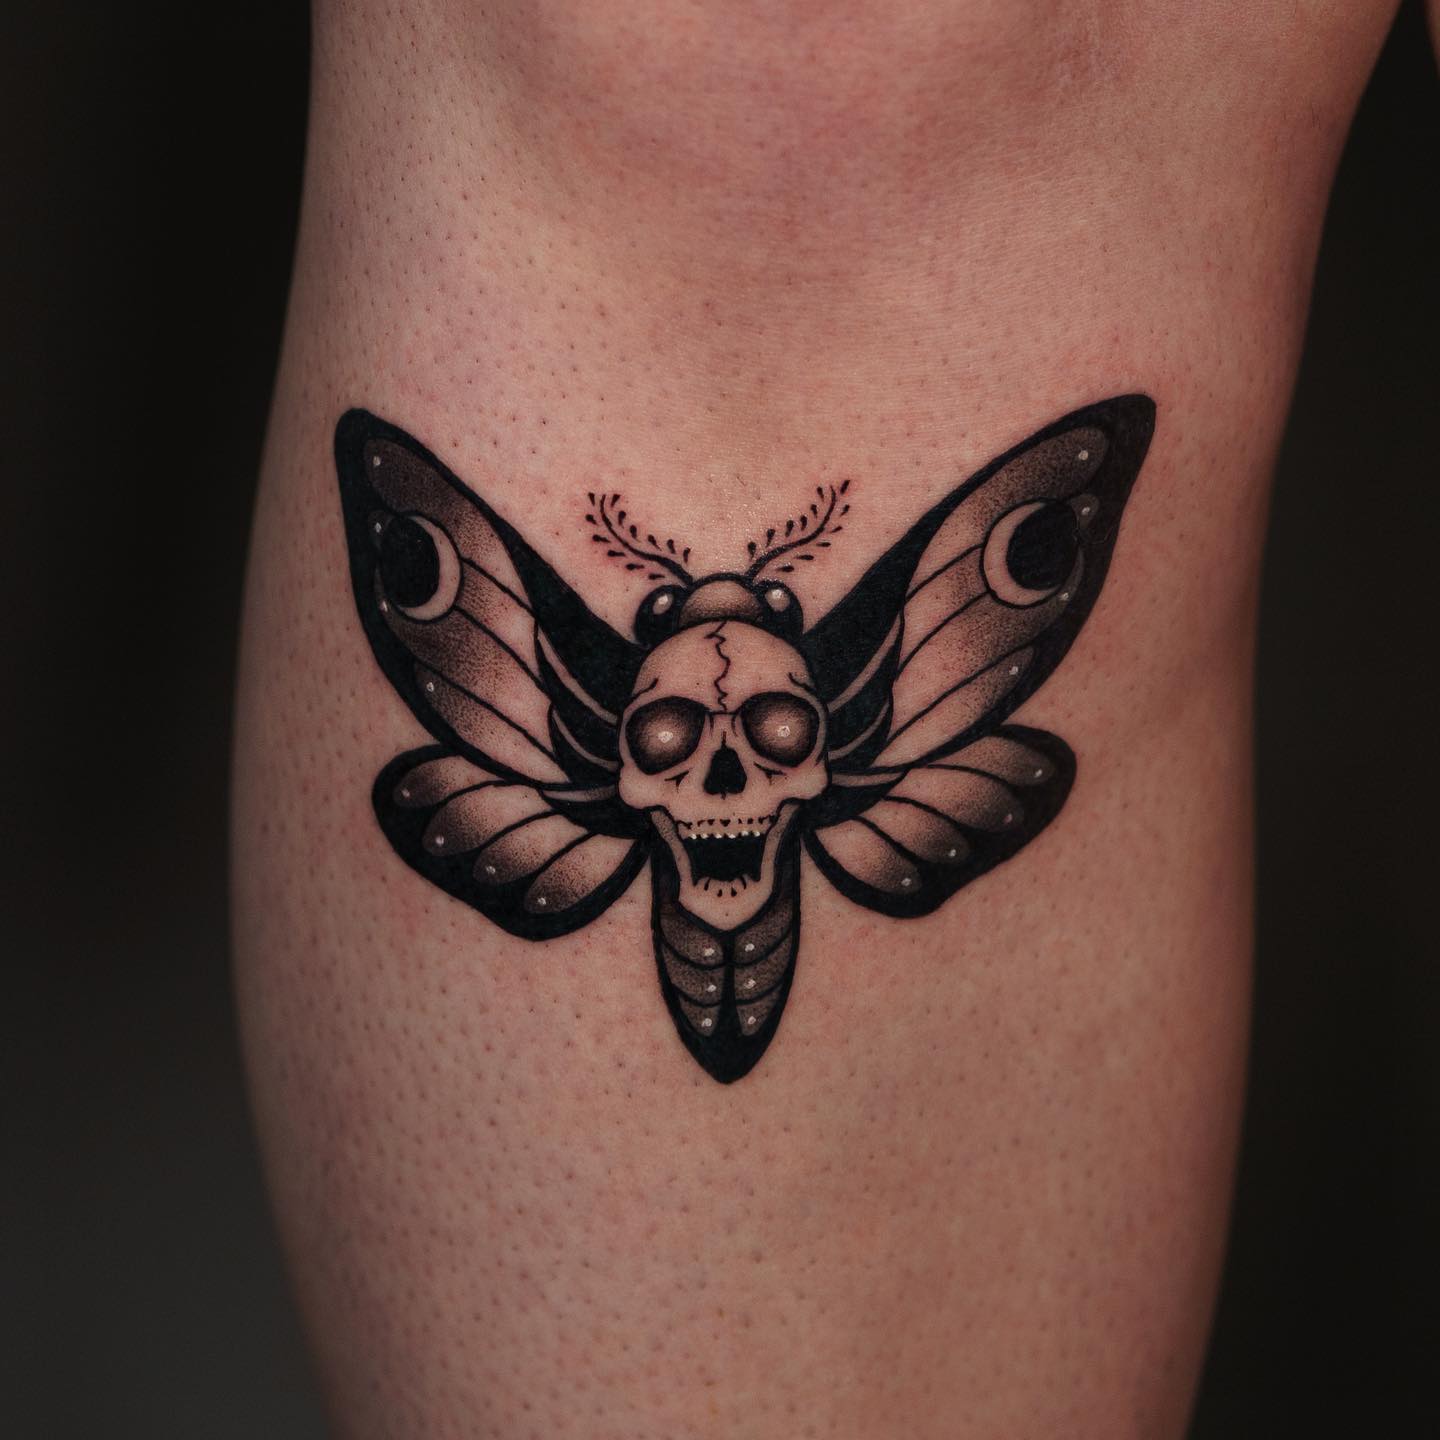 The black moth has to represent your inner growth and any obstacles that may be ahead. Show that life doesn’t have to be too hard and that not every situation is as black and white.